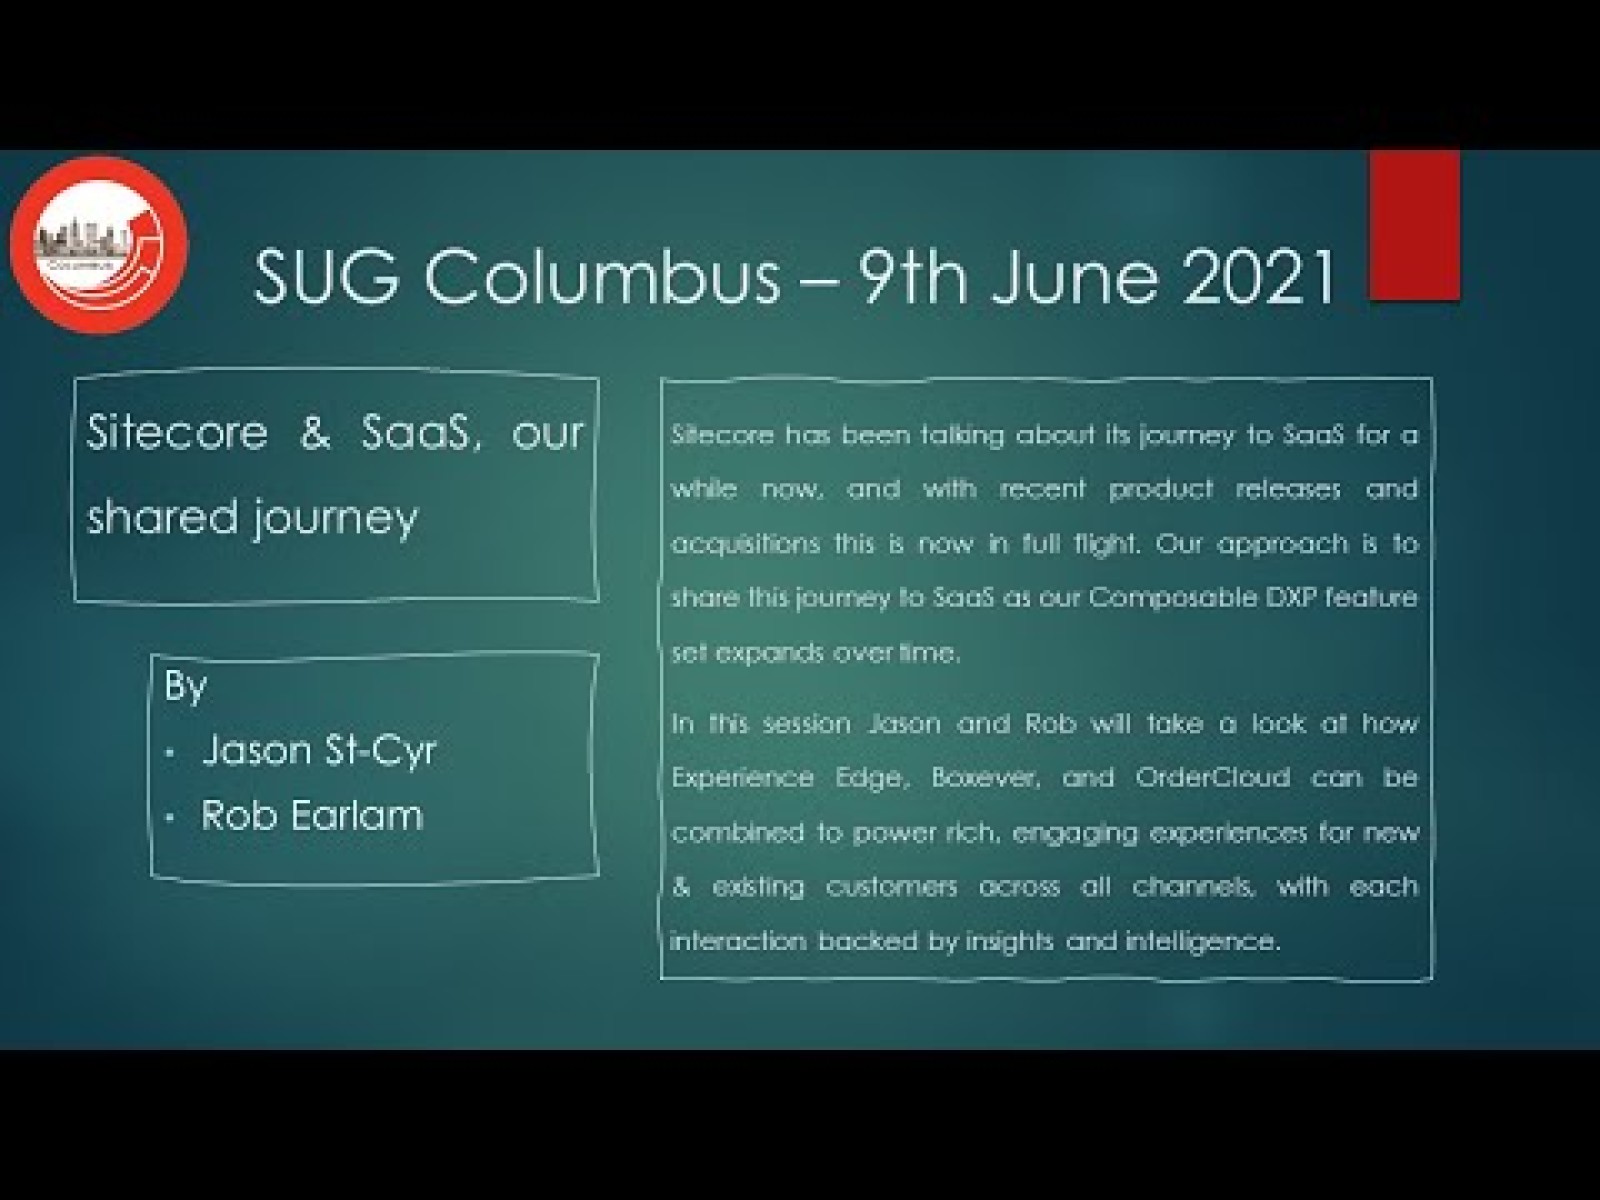 Sitecore and SaaS - Our shared journey